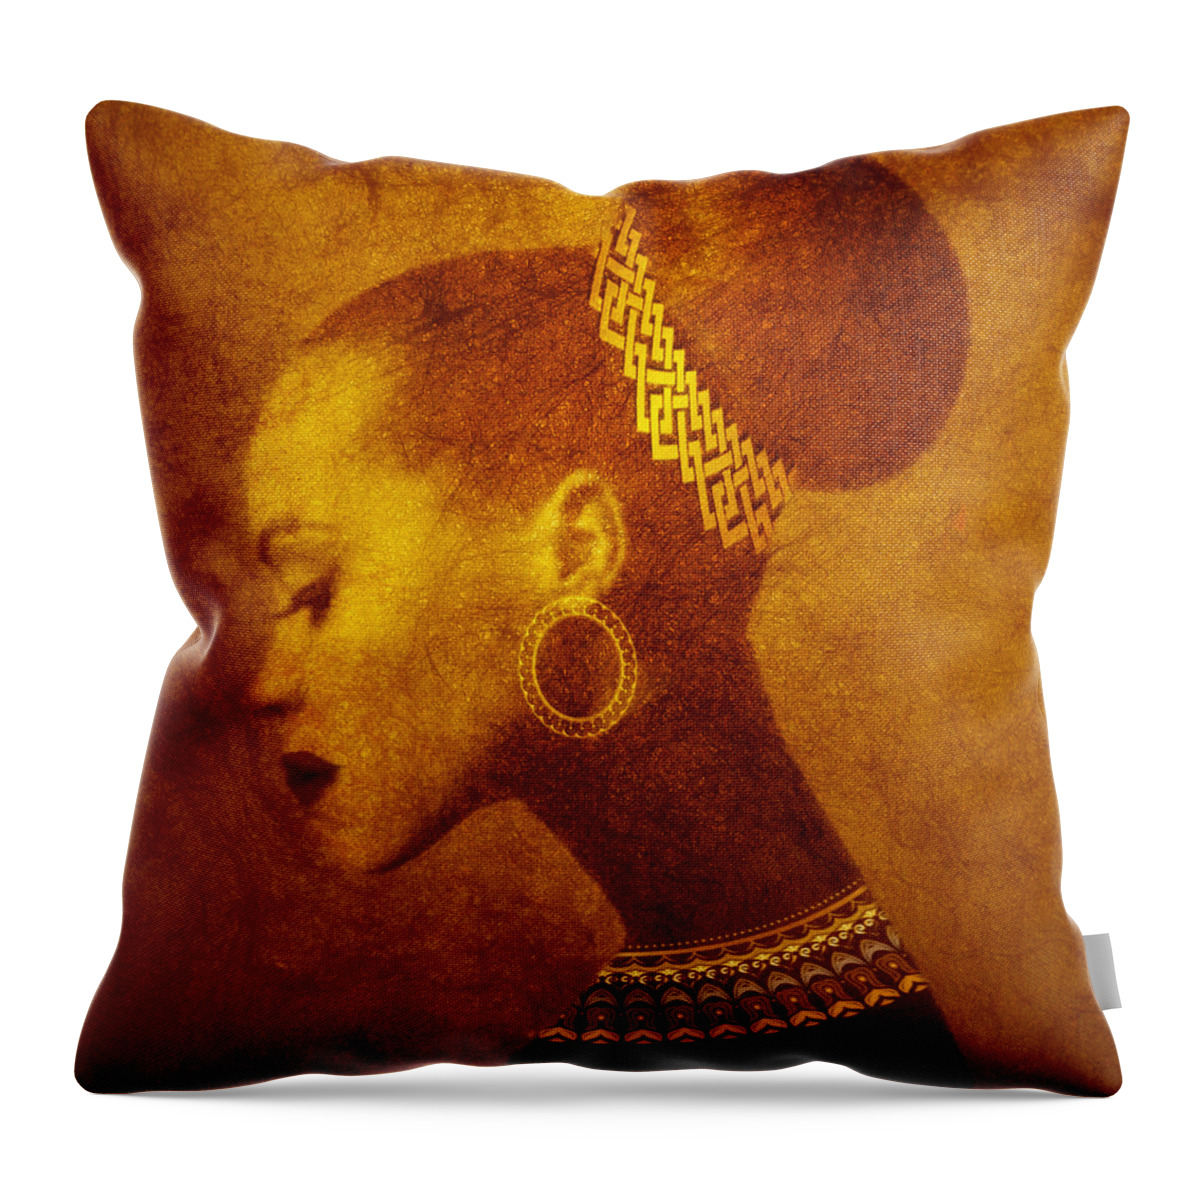 Beautiful Woman Throw Pillow featuring the digital art Martha by Canessa Thomas